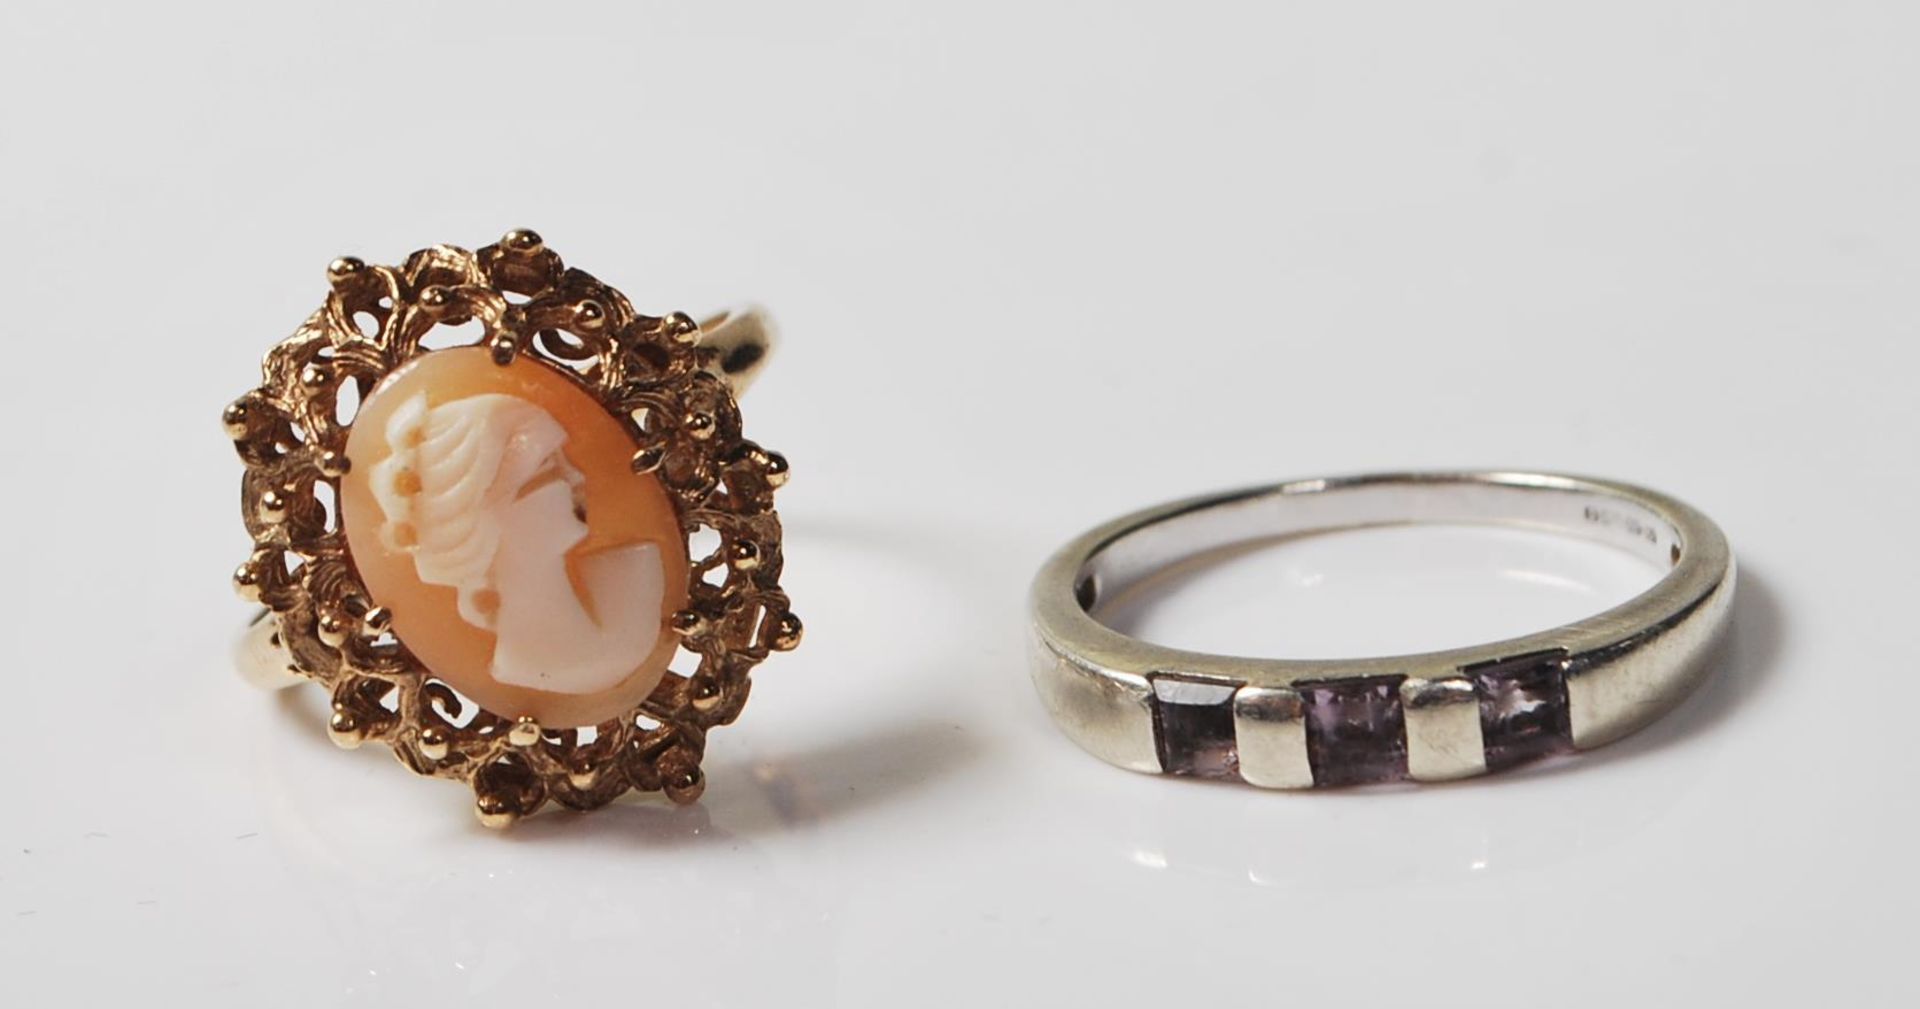 TWO 9CT GOLD RINGS. CAMEO RING - WHITE GOLD RING.